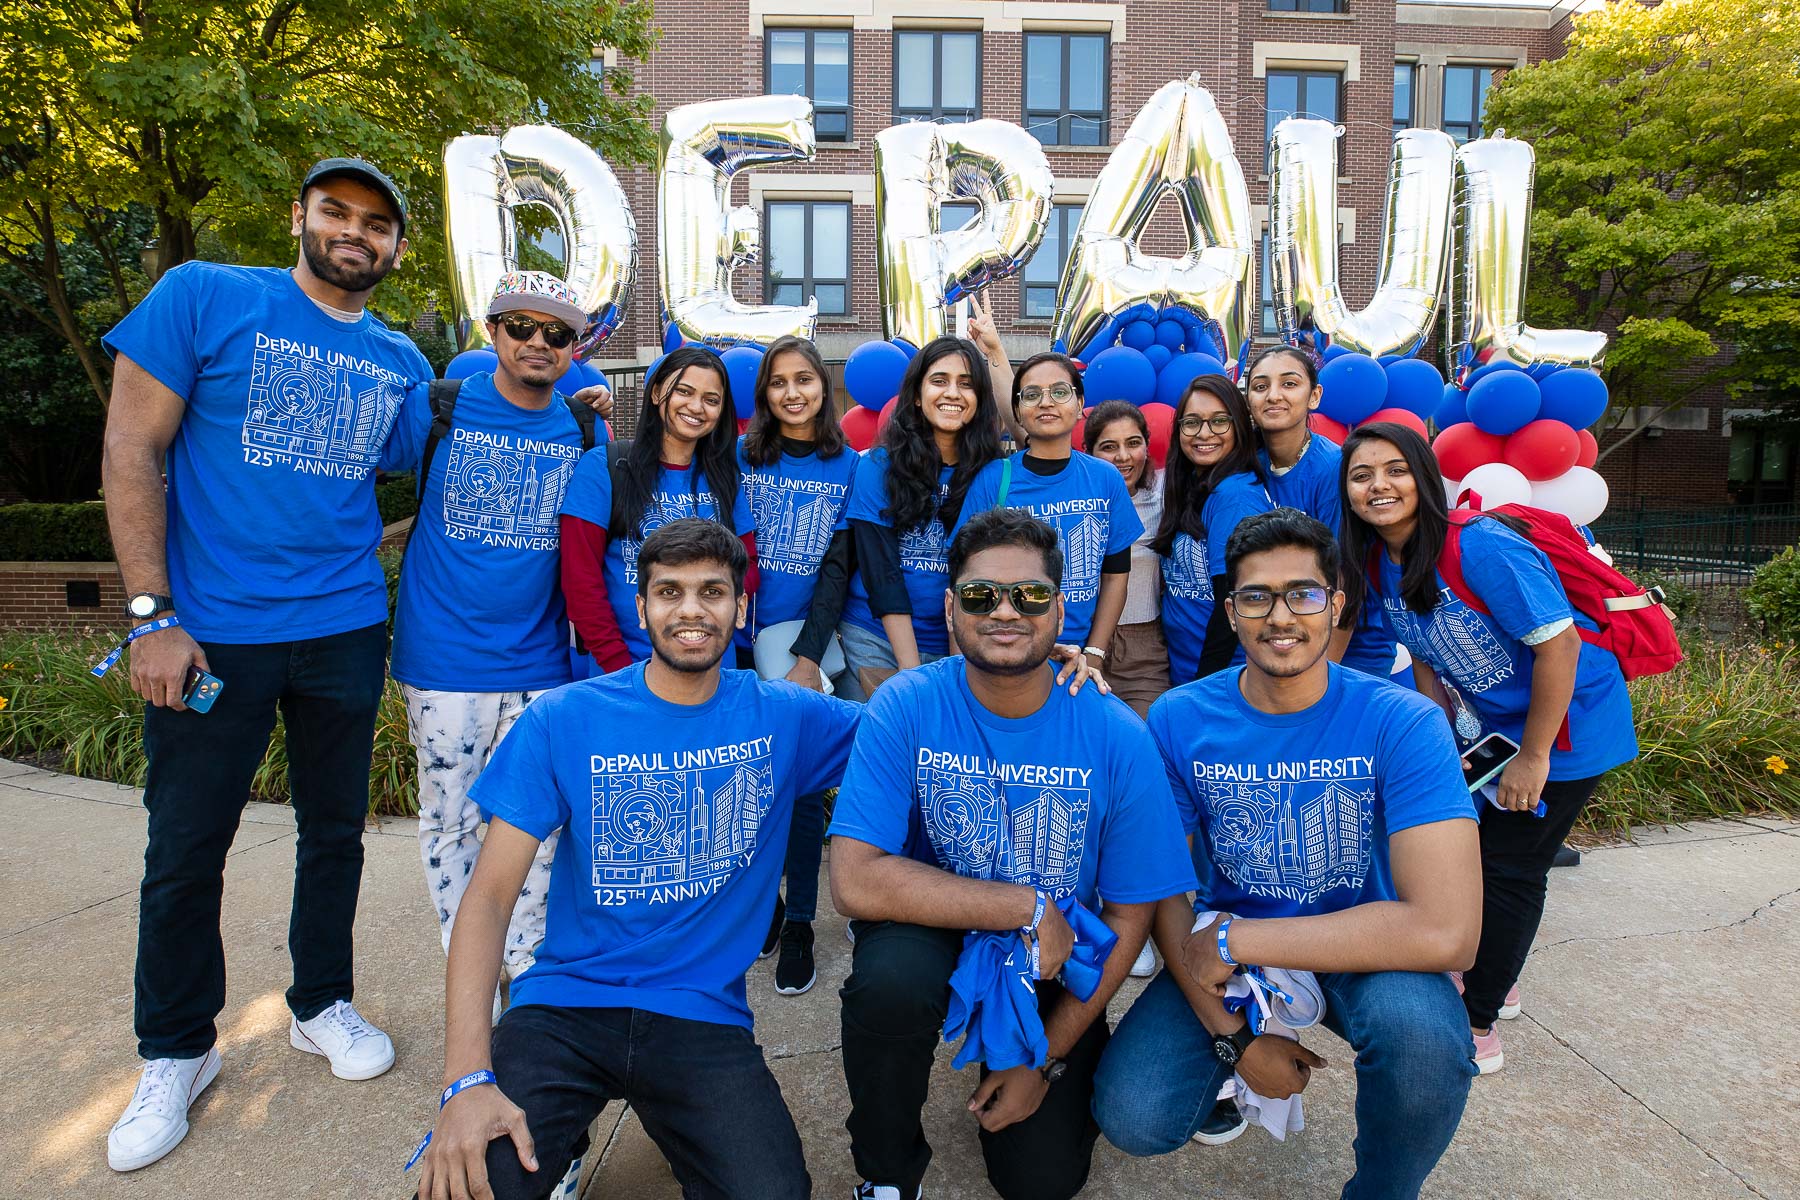 The Quad buzzed with excitement throughout the Student Affairs hosted event. (DePaul University/Jeff Carrion)